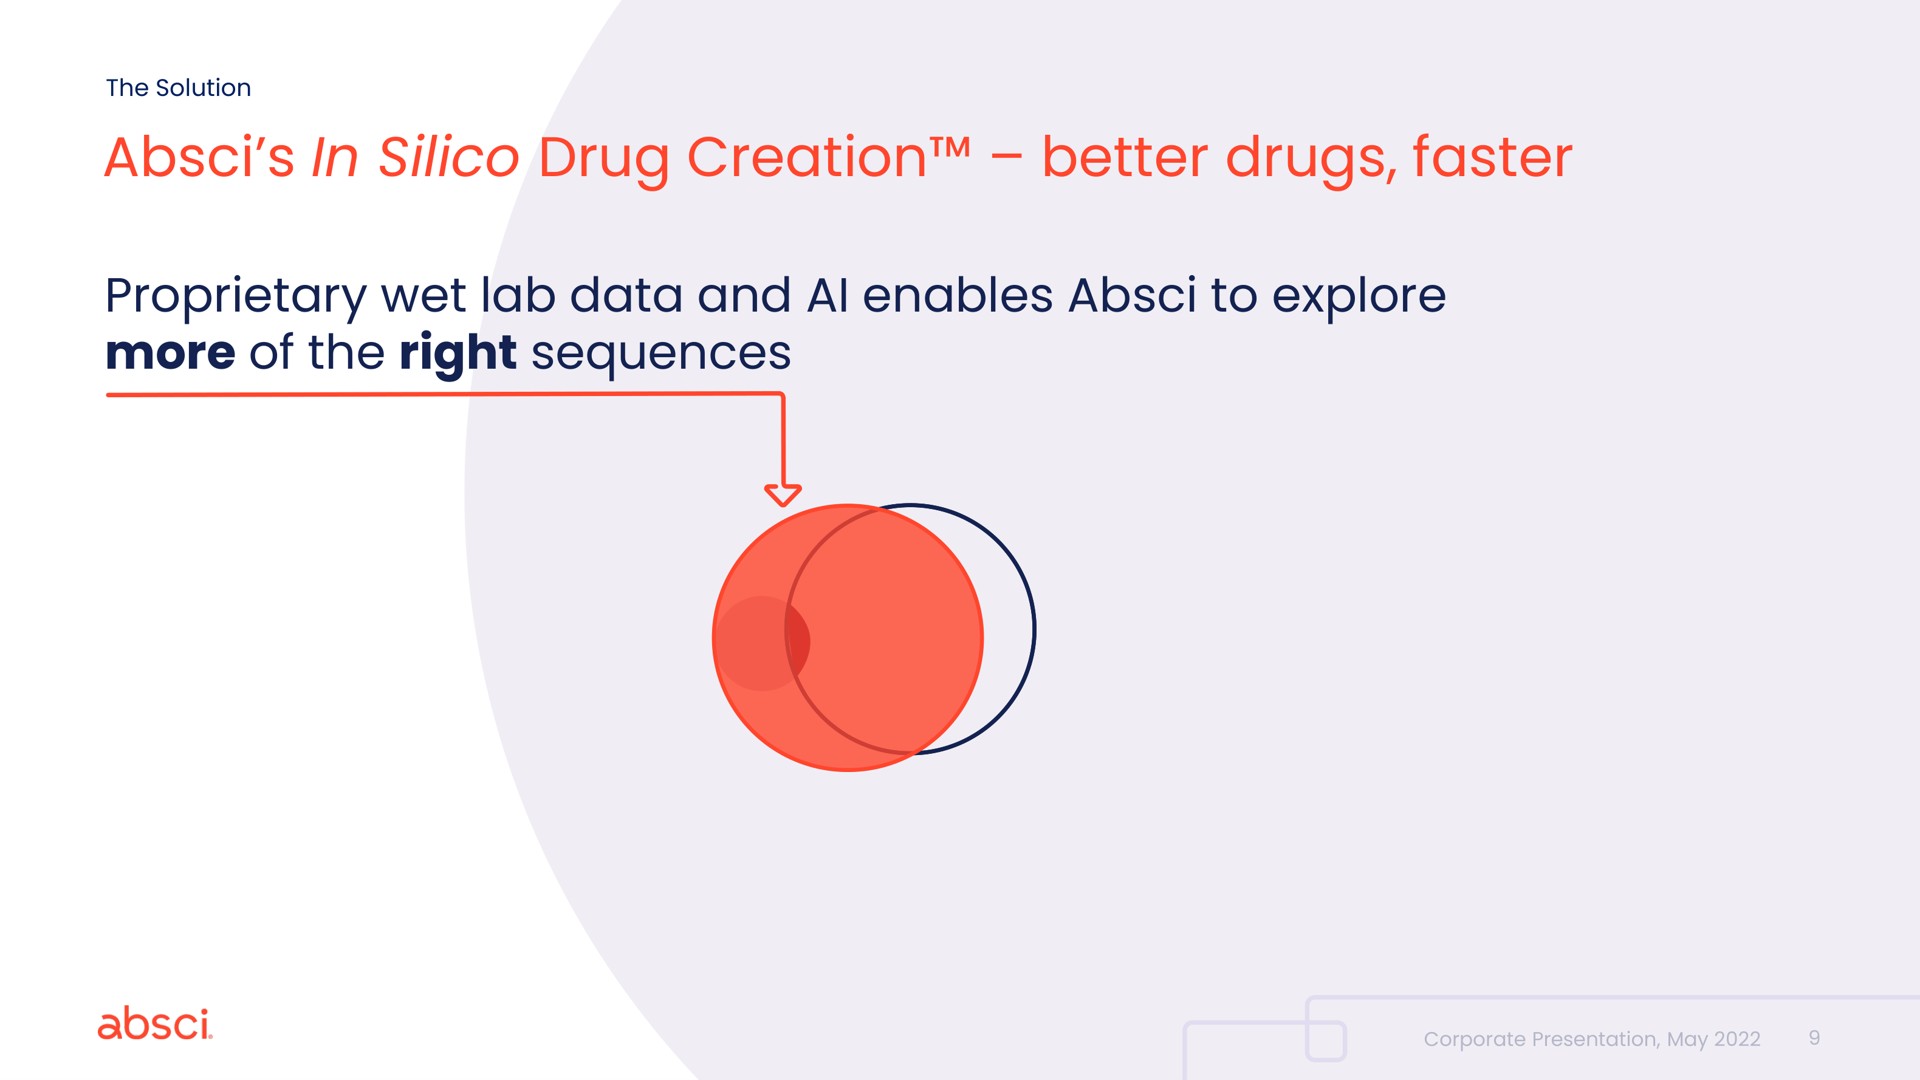 in silico drug creation better drugs faster proprietary wet lab data and enables to explore more of the right sequences | Absci